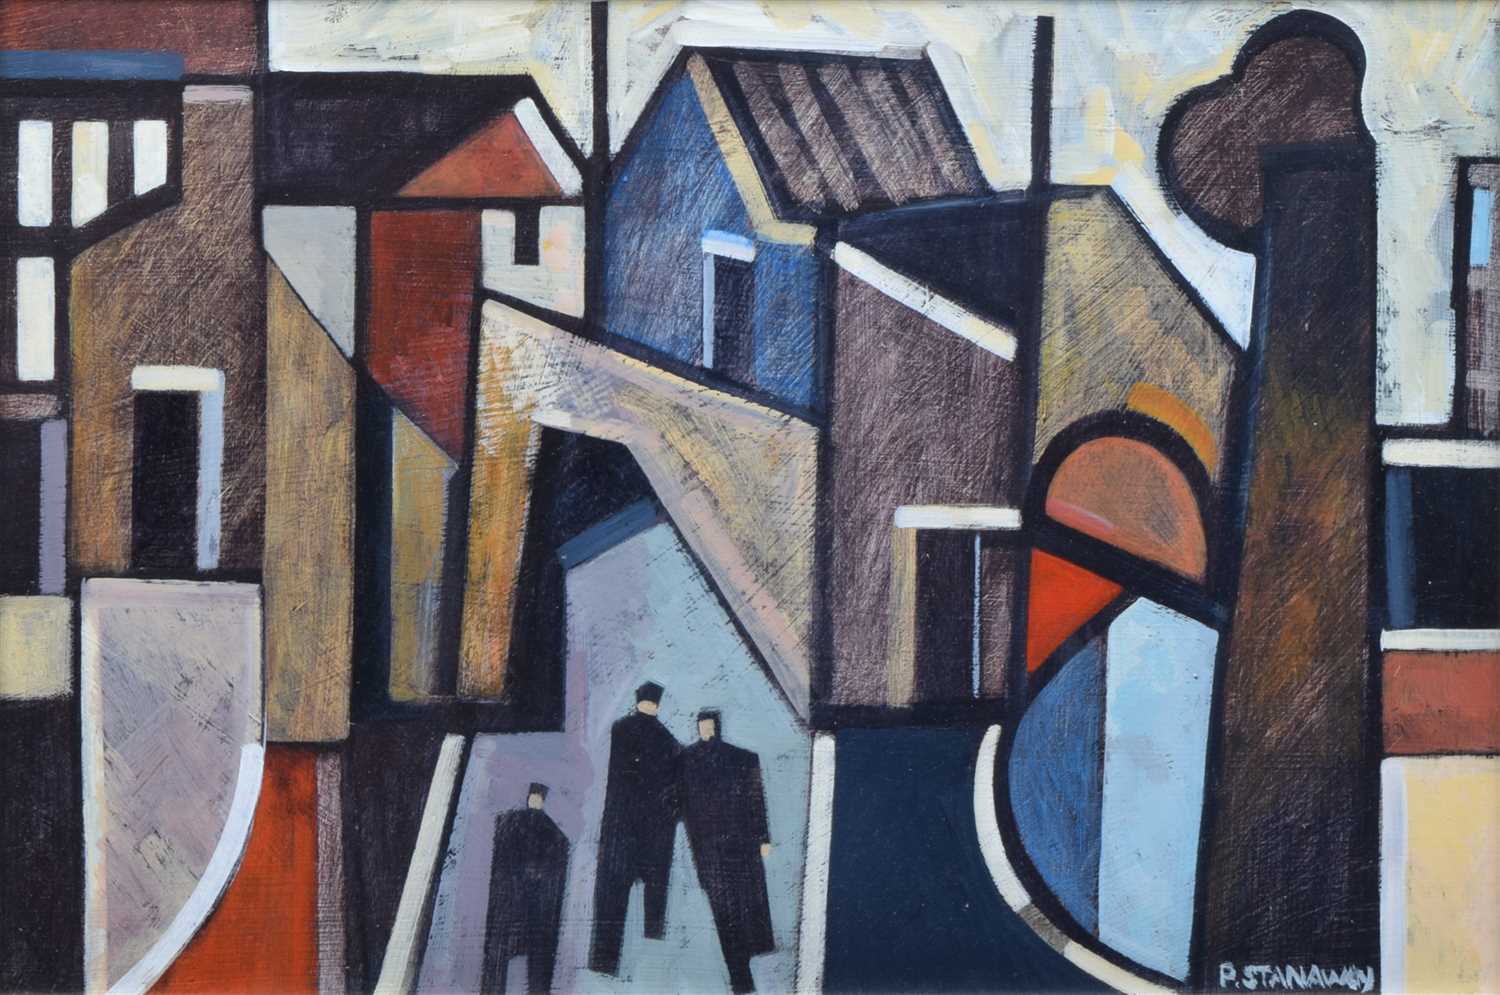 Lot 397 - Peter Stanaway, "Canal, Salford", acrylic.